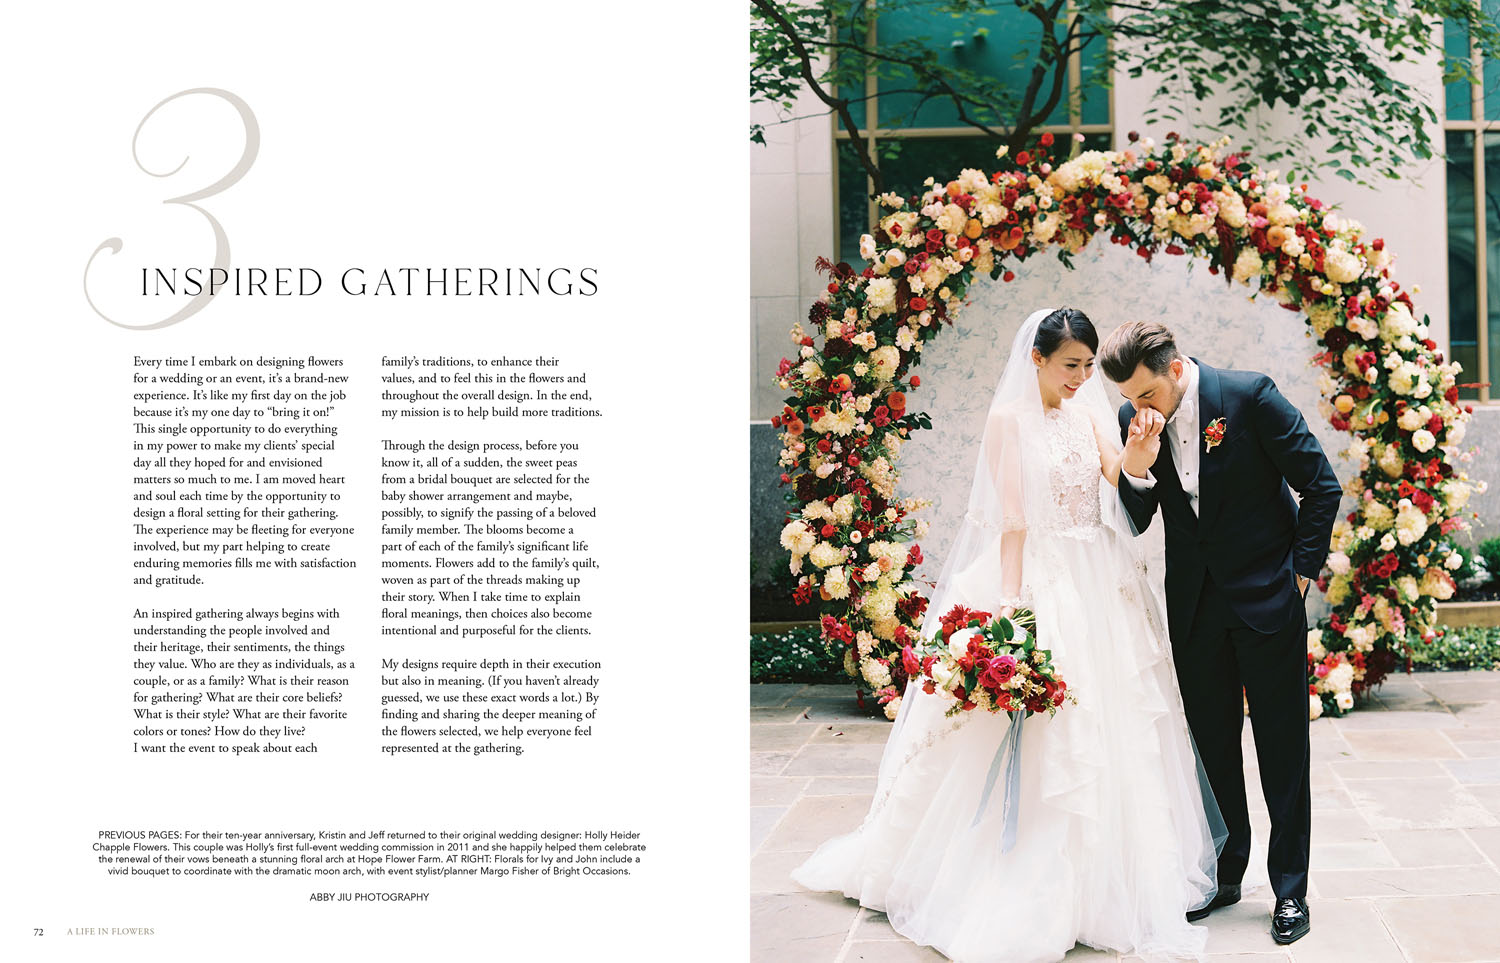 A chapter opener for A Life in Flowers reads “Inspired Gatherings.” On the facing page, a groom kisses a bride’s against the backdrop of a large floral hoop